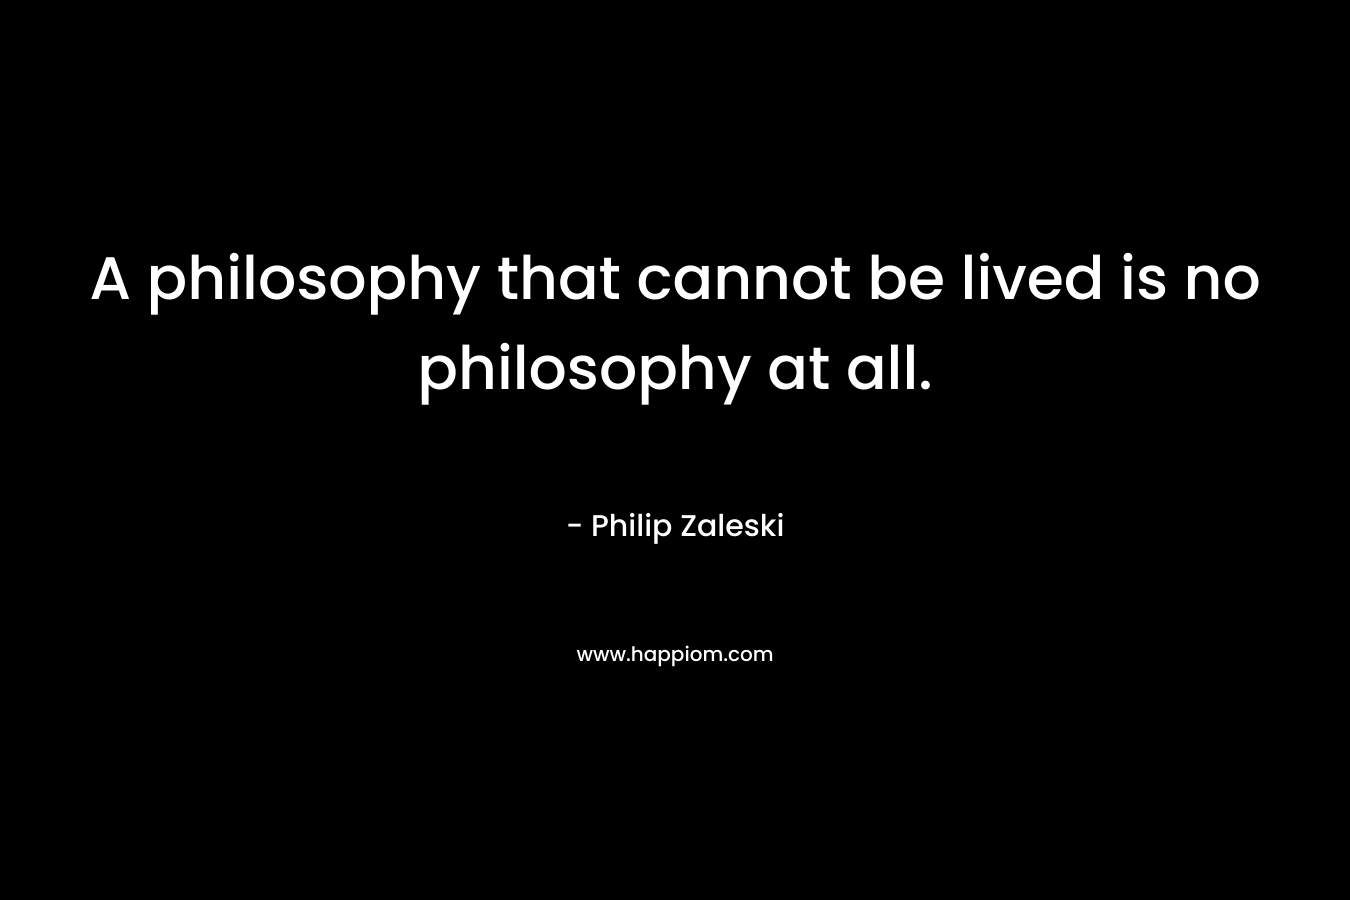 A philosophy that cannot be lived is no philosophy at all.